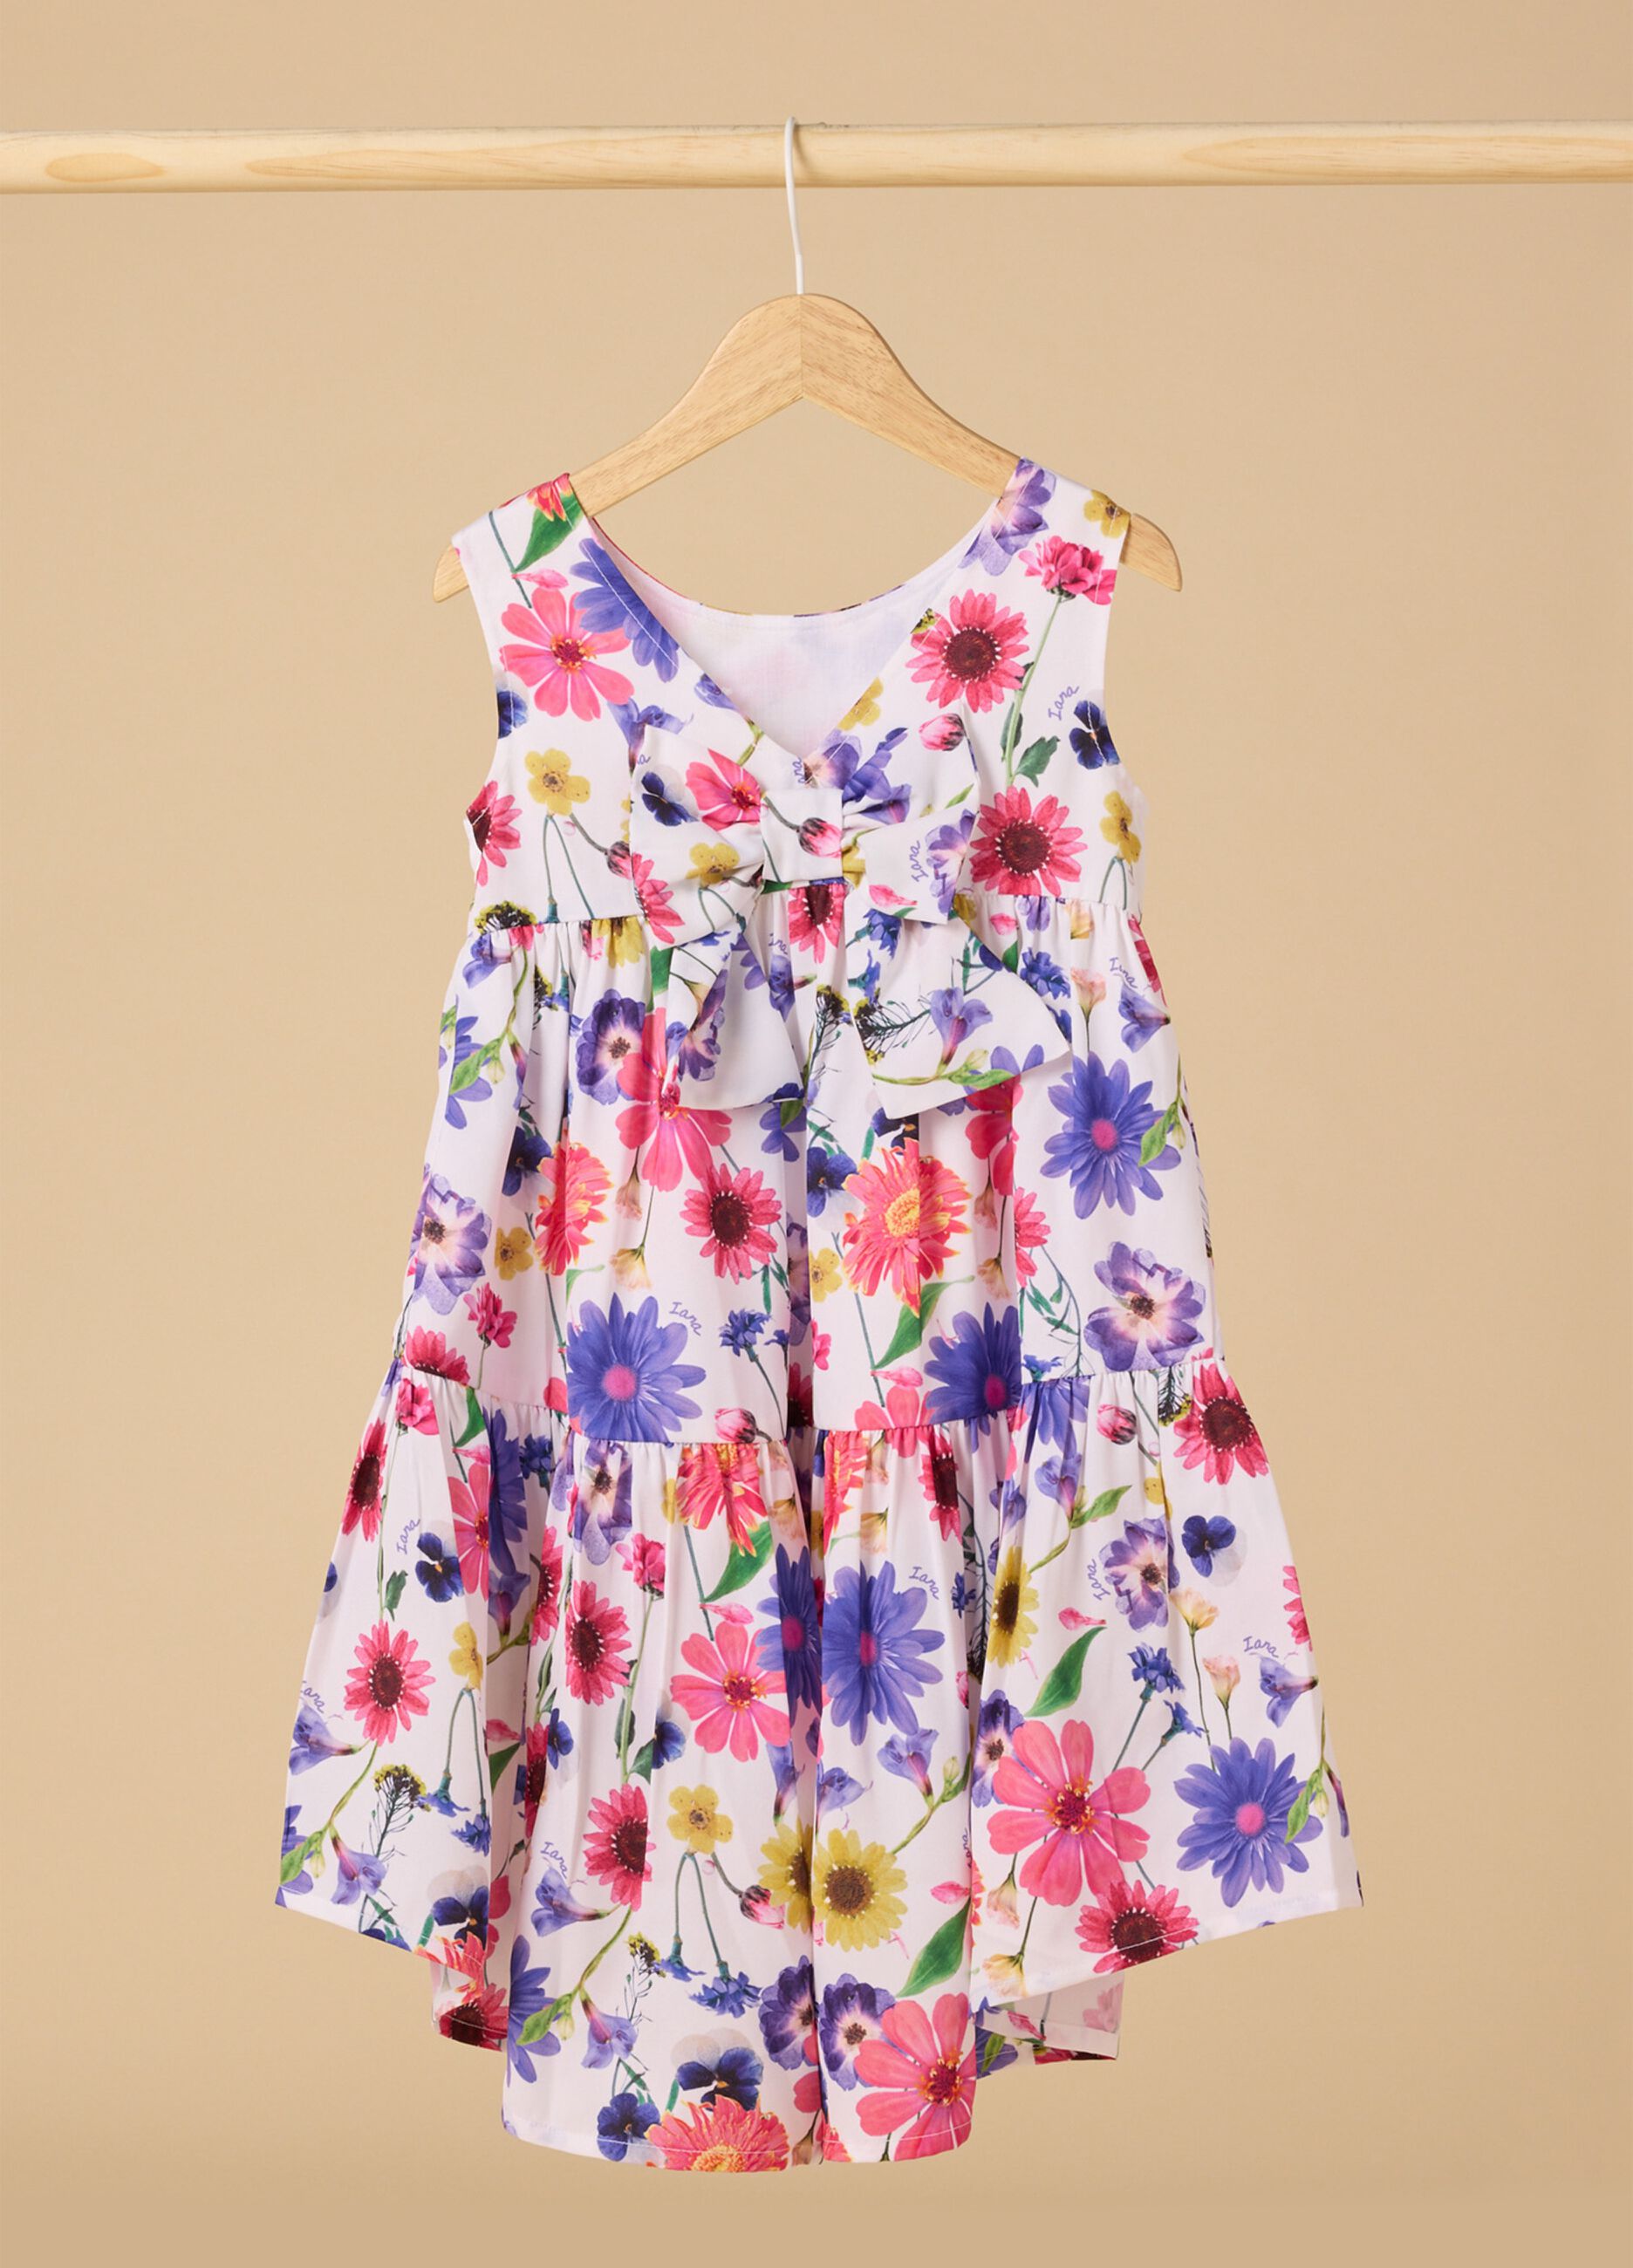 Flounced dress with floral print